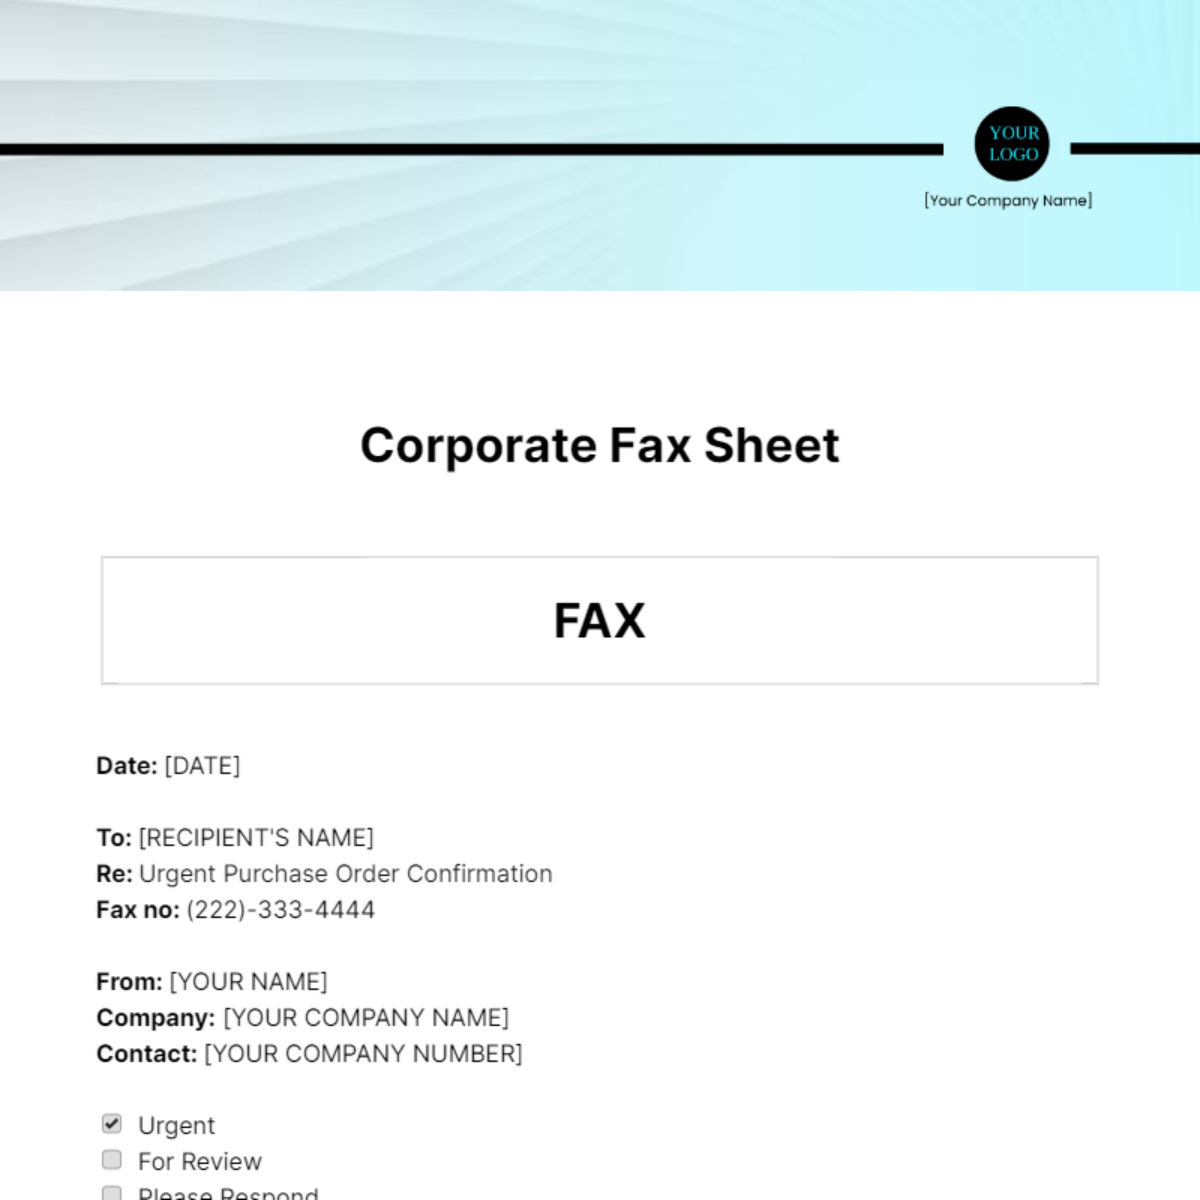 Free Corporate Fax Sheet Template